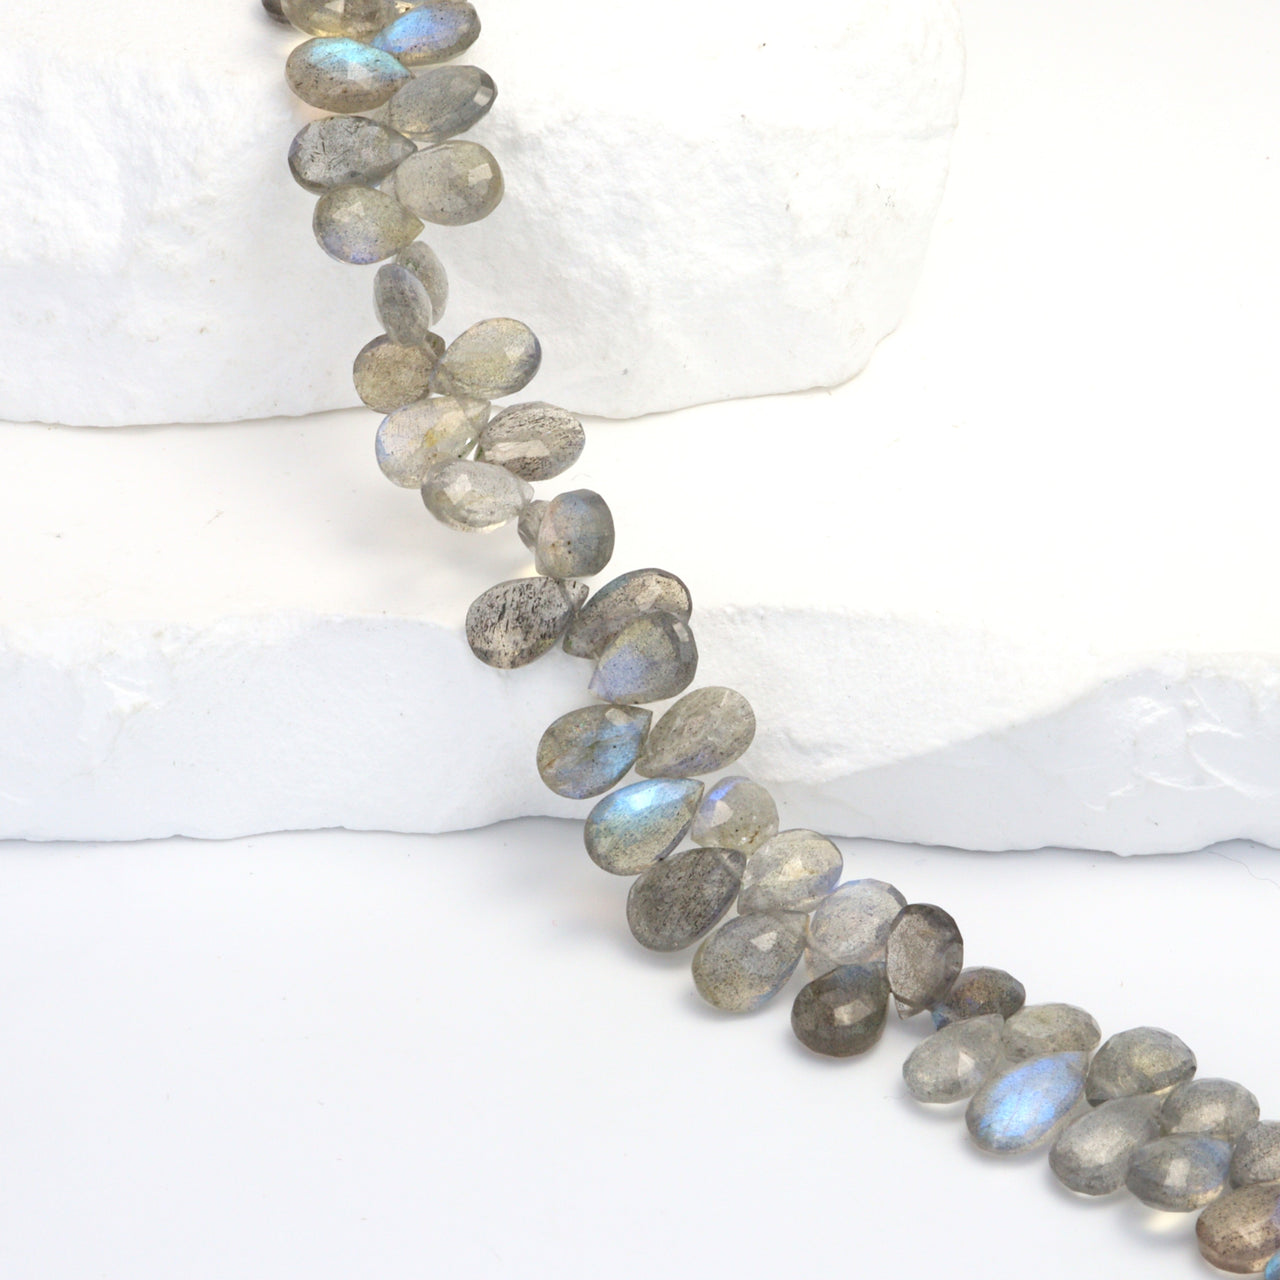 AA Blue Labradorite 6x8mm Faceted Pear Shaped Briolettes